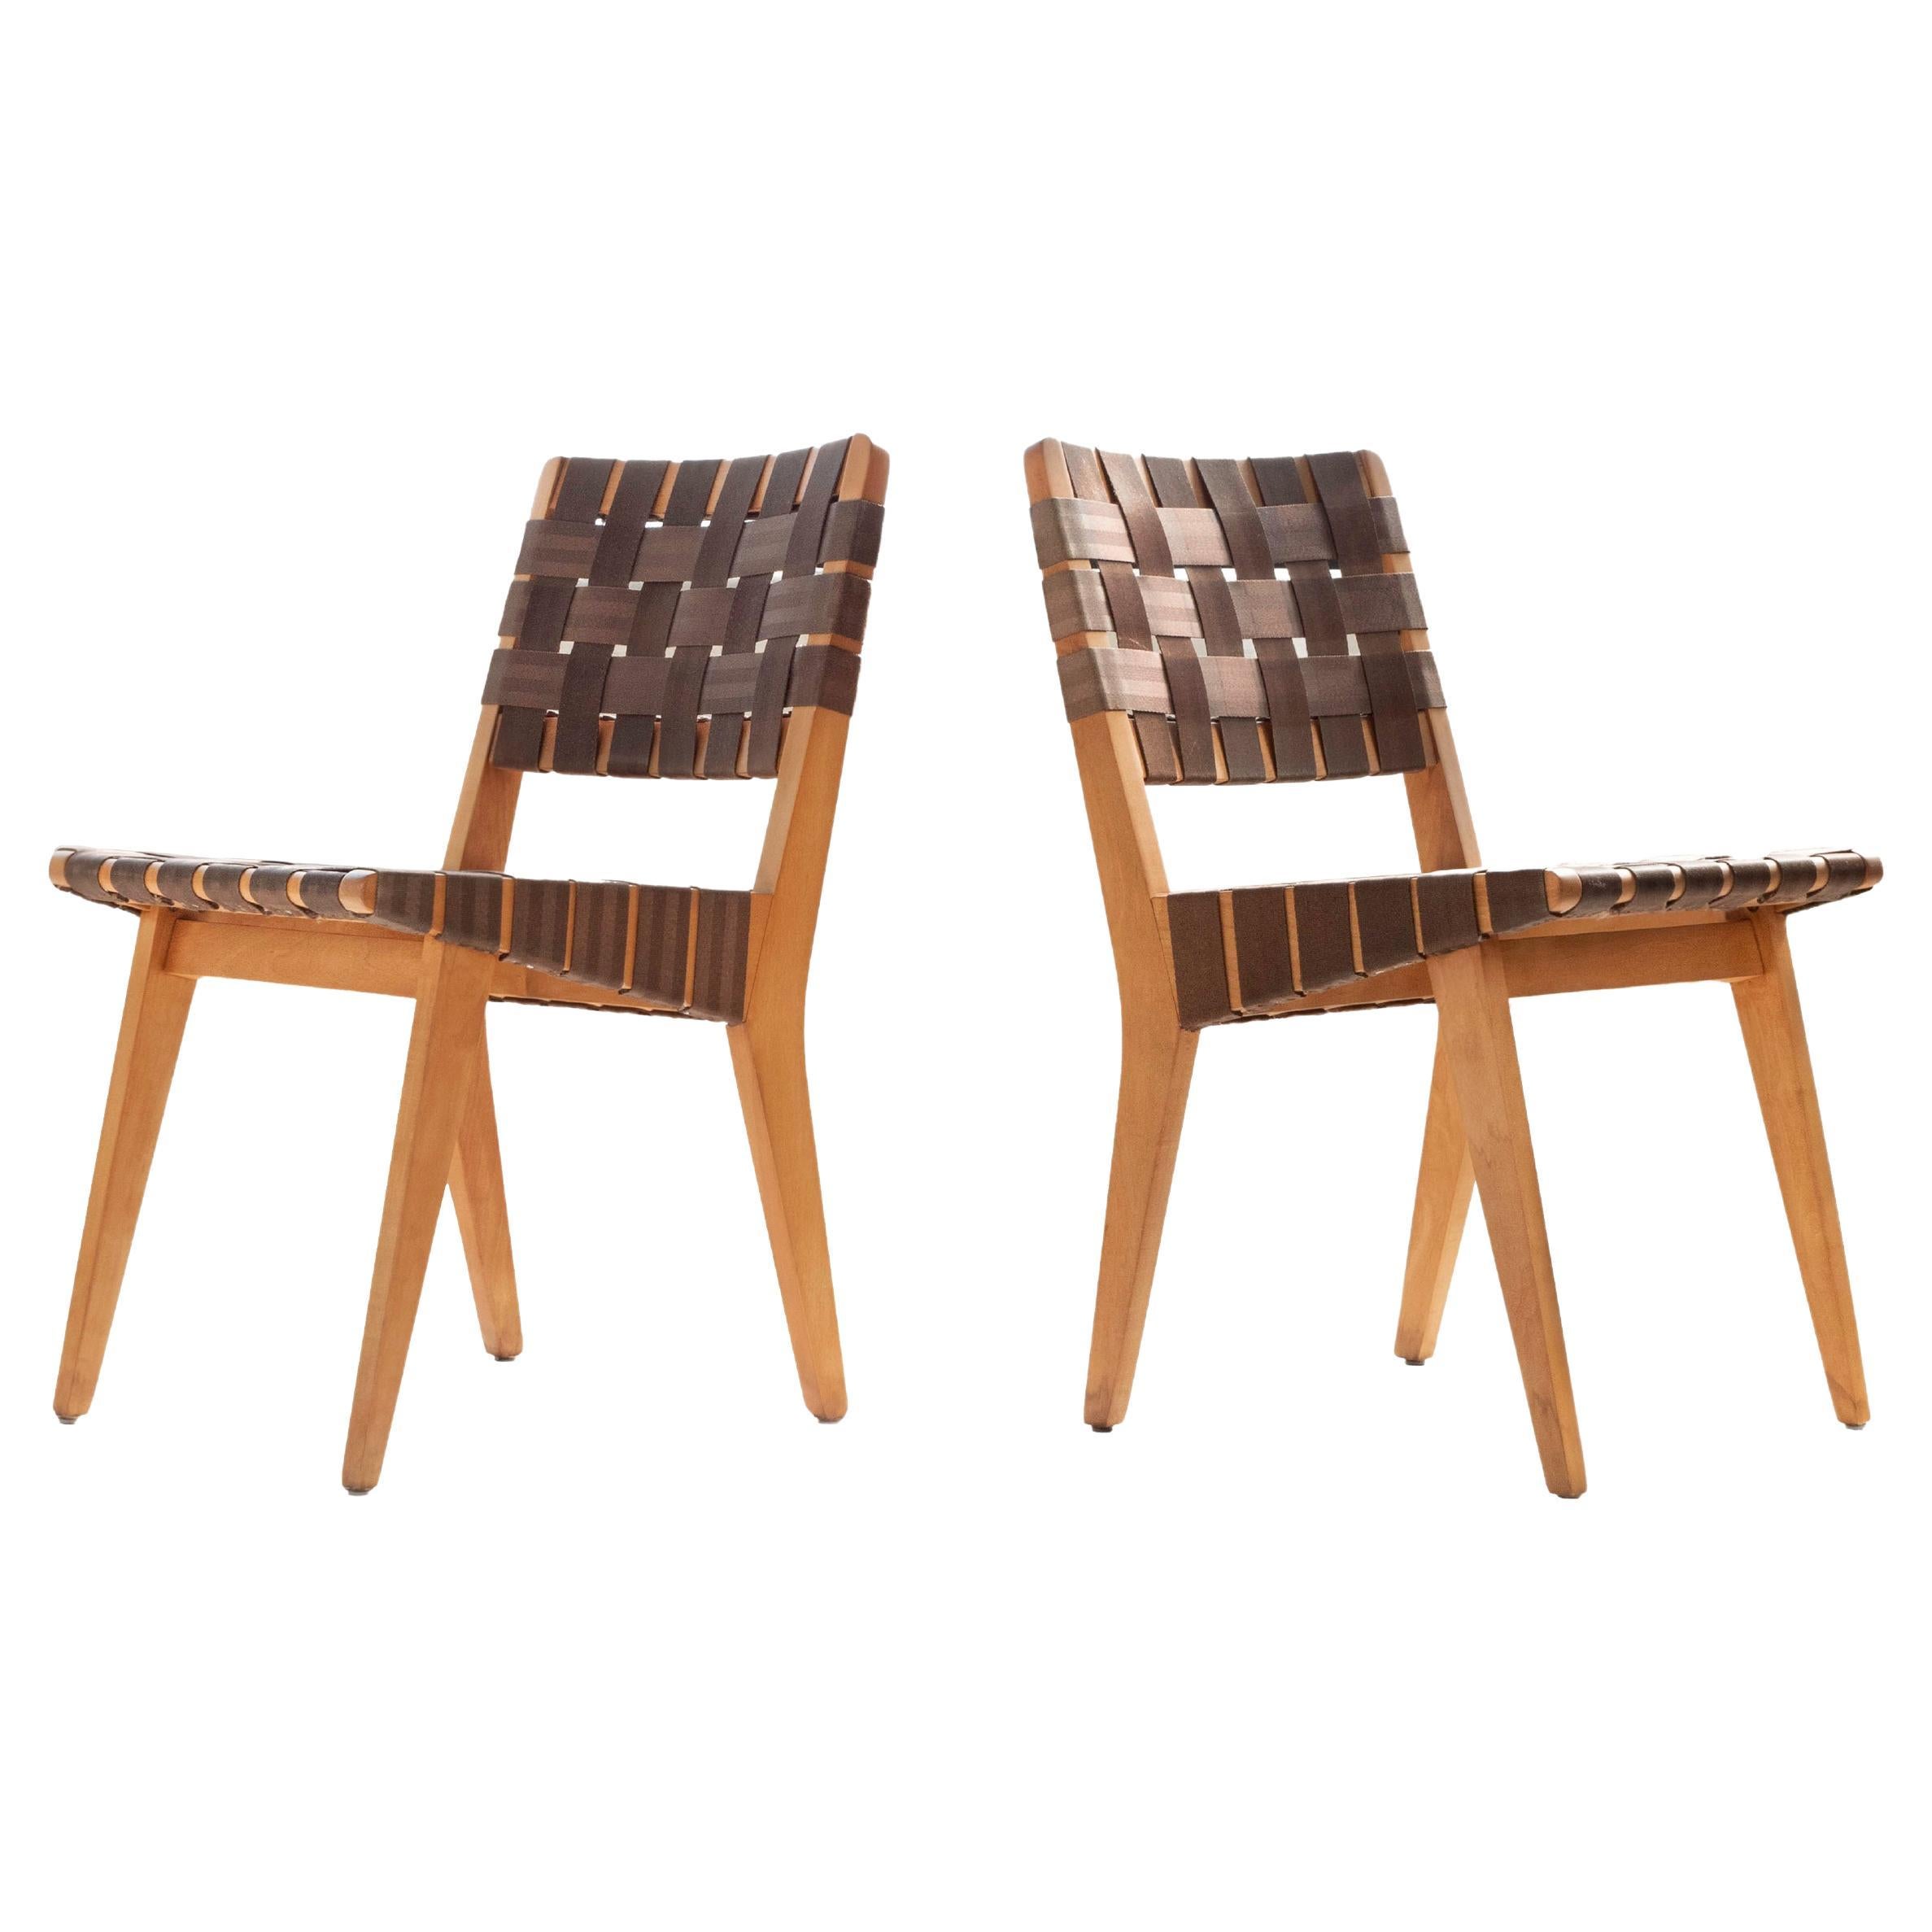 Jens Risom Original Pair of Side Chairs for Walter Knoll, Circa 1940's For Sale